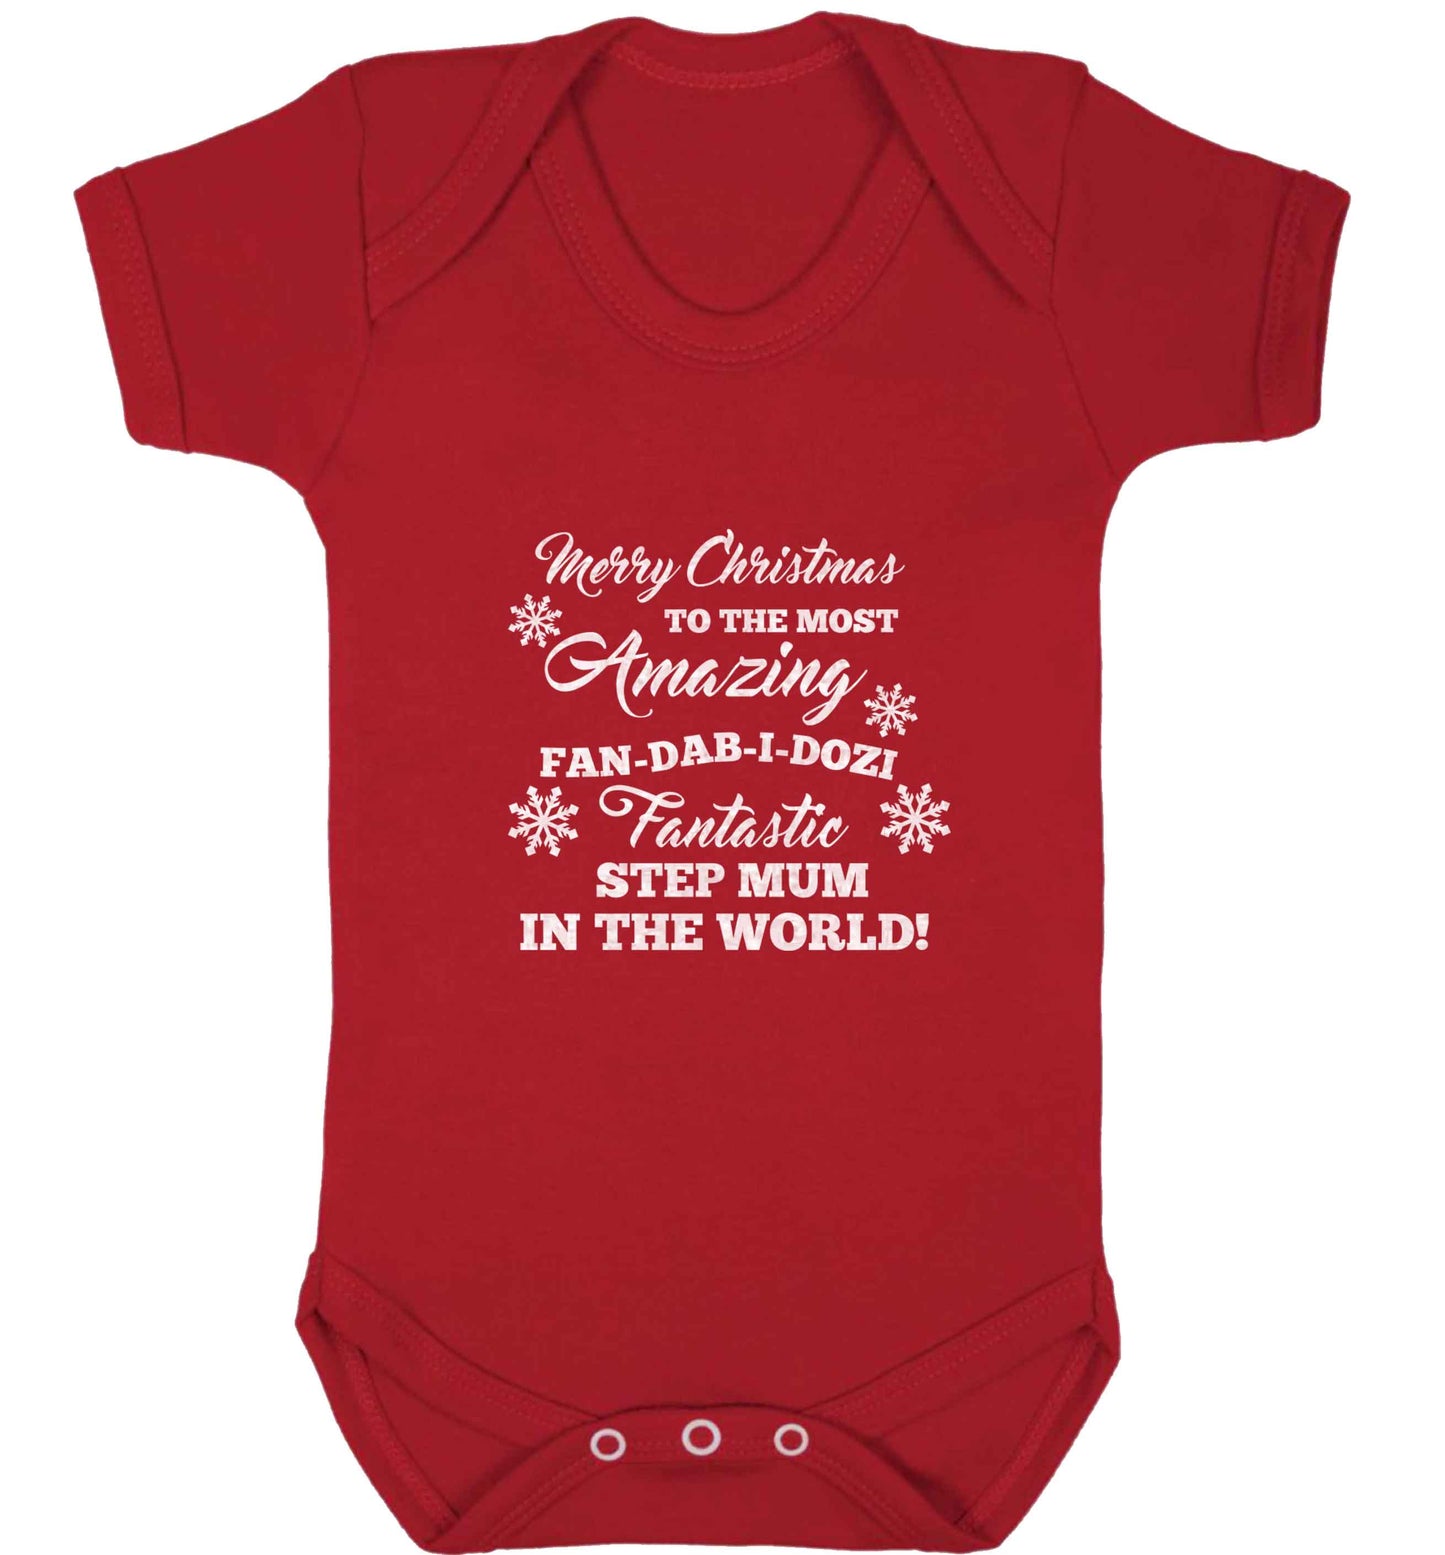 Merry Christmas to the most amazing fan-dab-i-dozi fantasic Step Mum in the world baby vest red 18-24 months